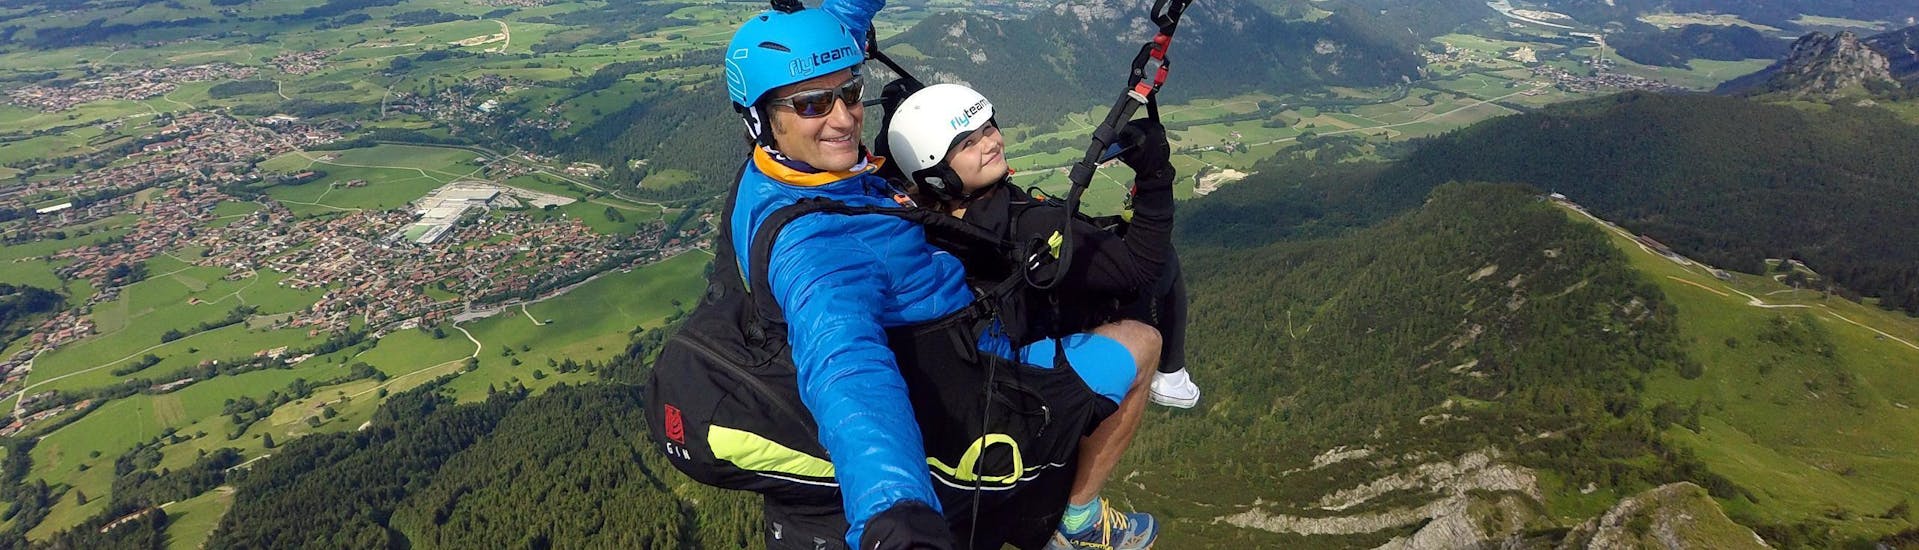 A tandem pilot from FlyTeam and his young passenger are soaring high above the Allgäu Prealps during the Tandem Paragliding "Panorama" from Breitenberg.